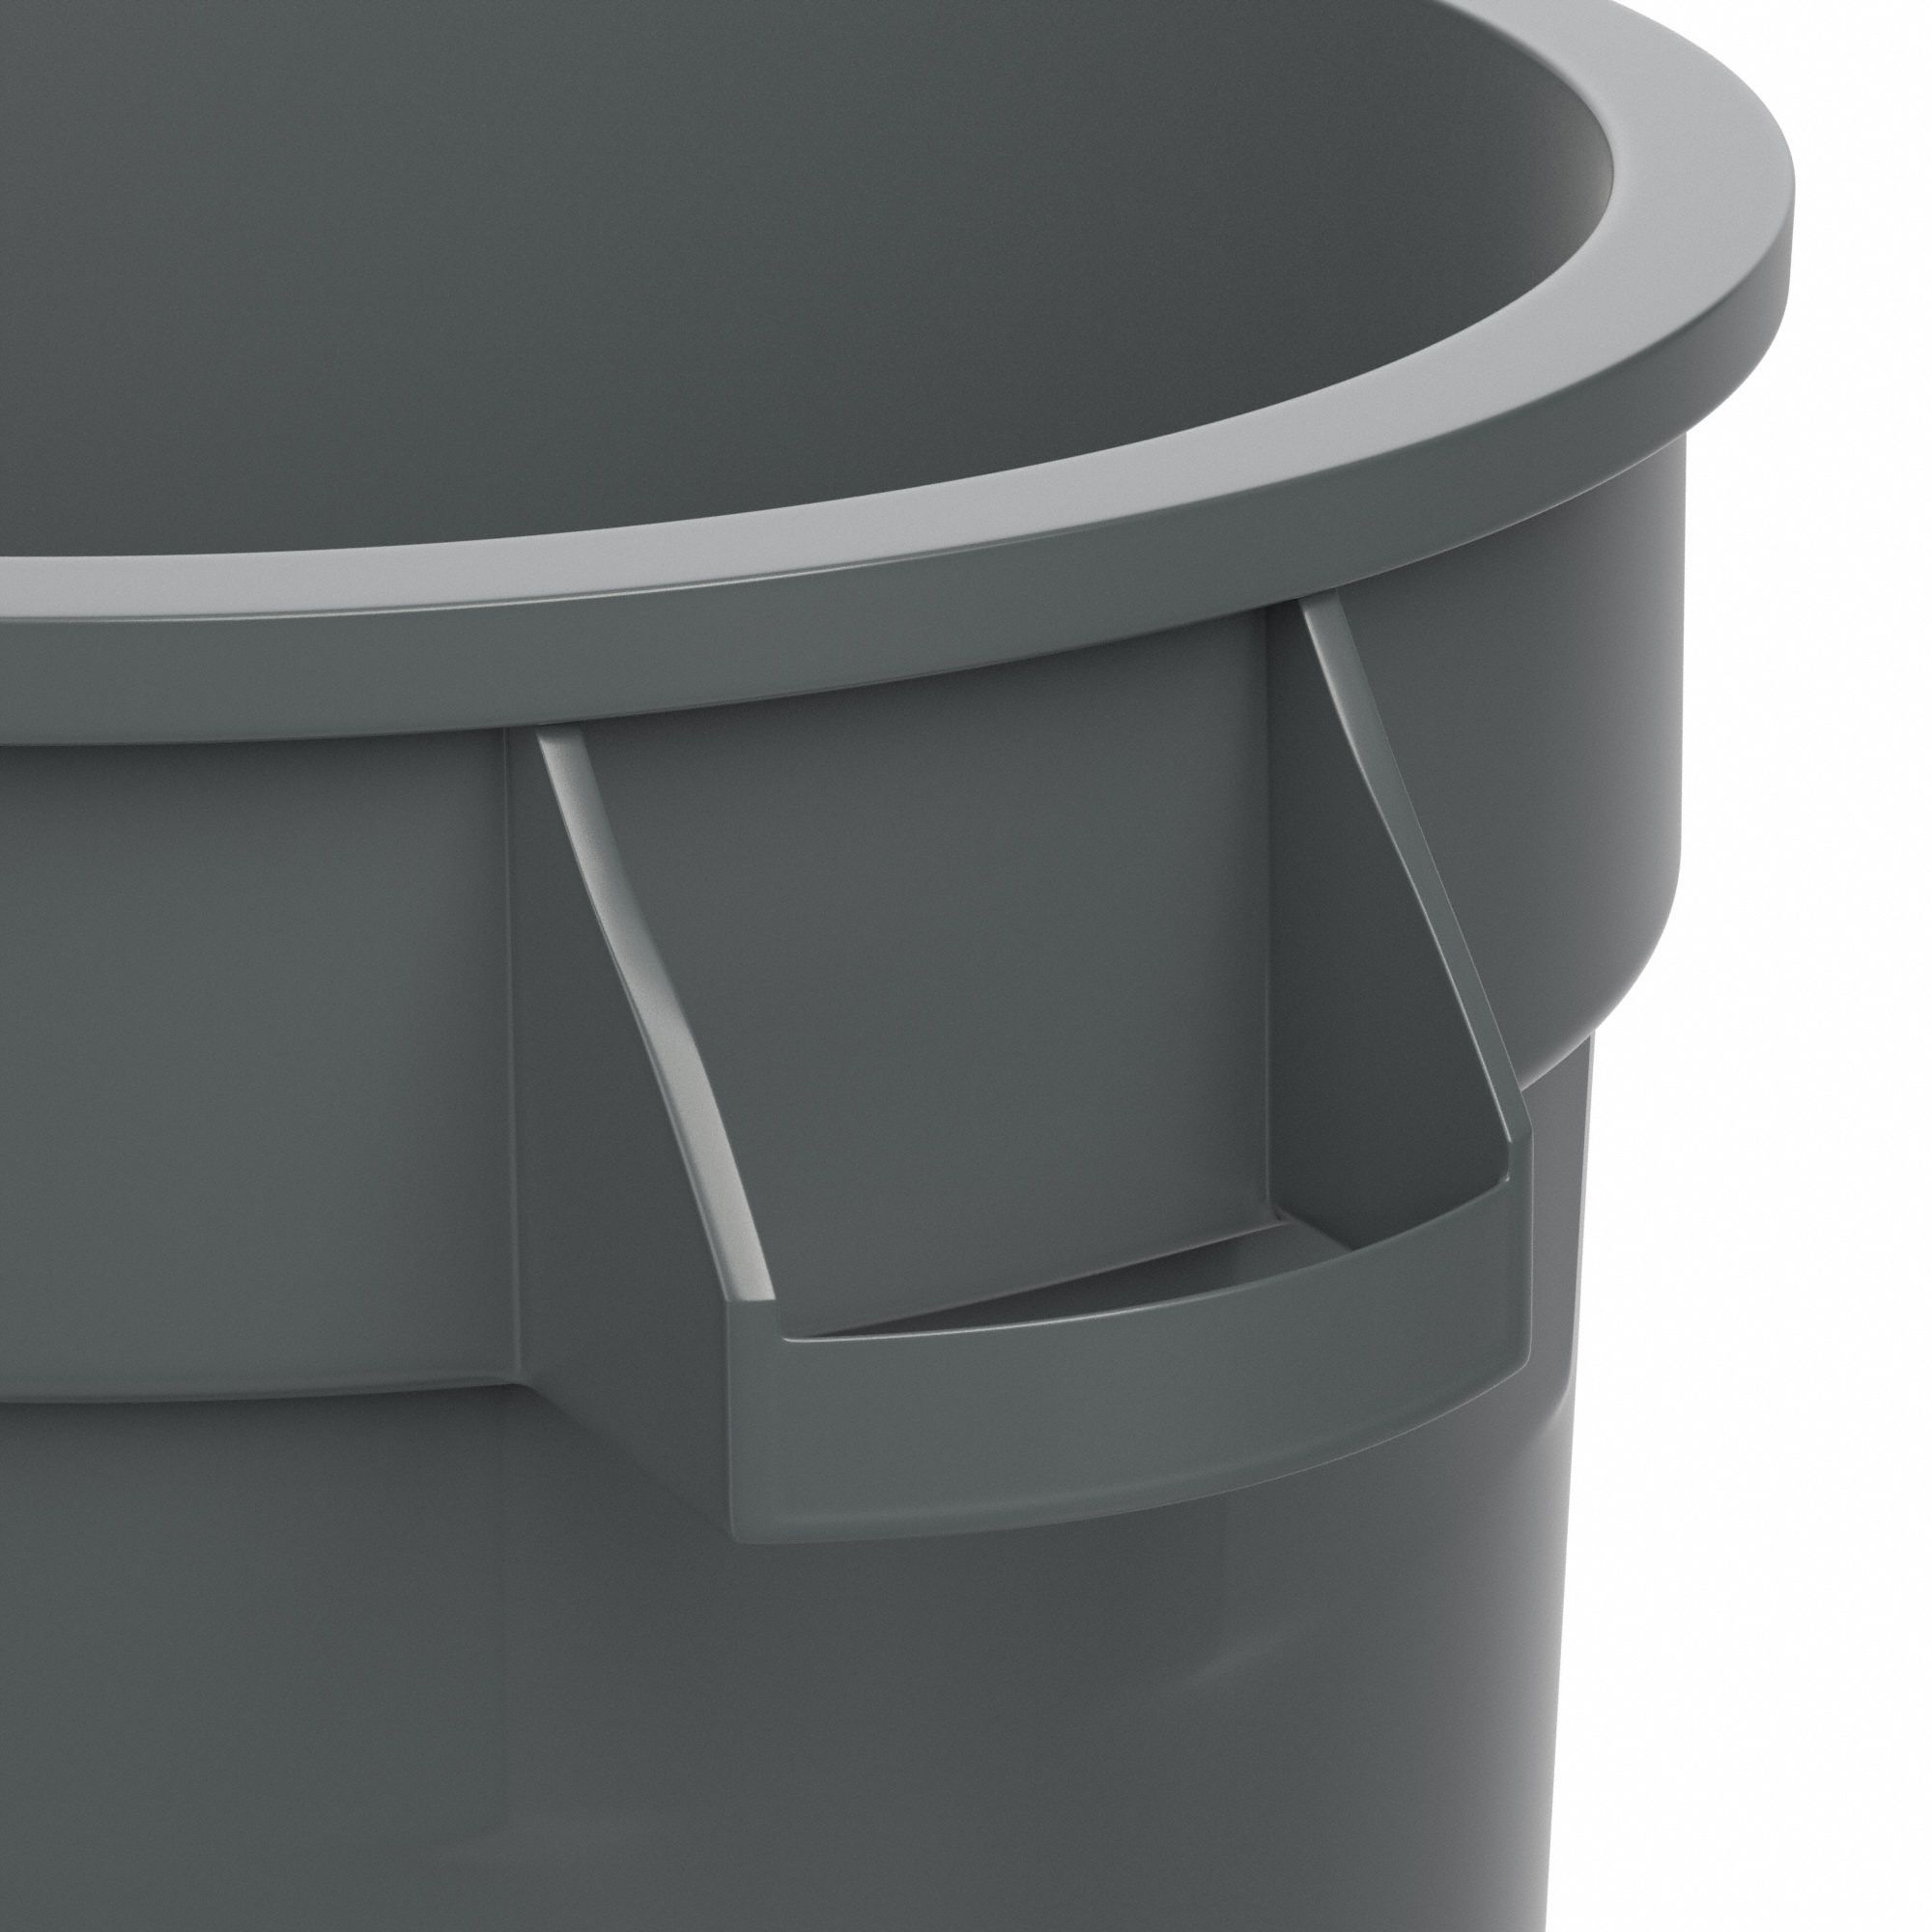 Tough Guy 4PGR7 22 gal. Gray Round Trash Can